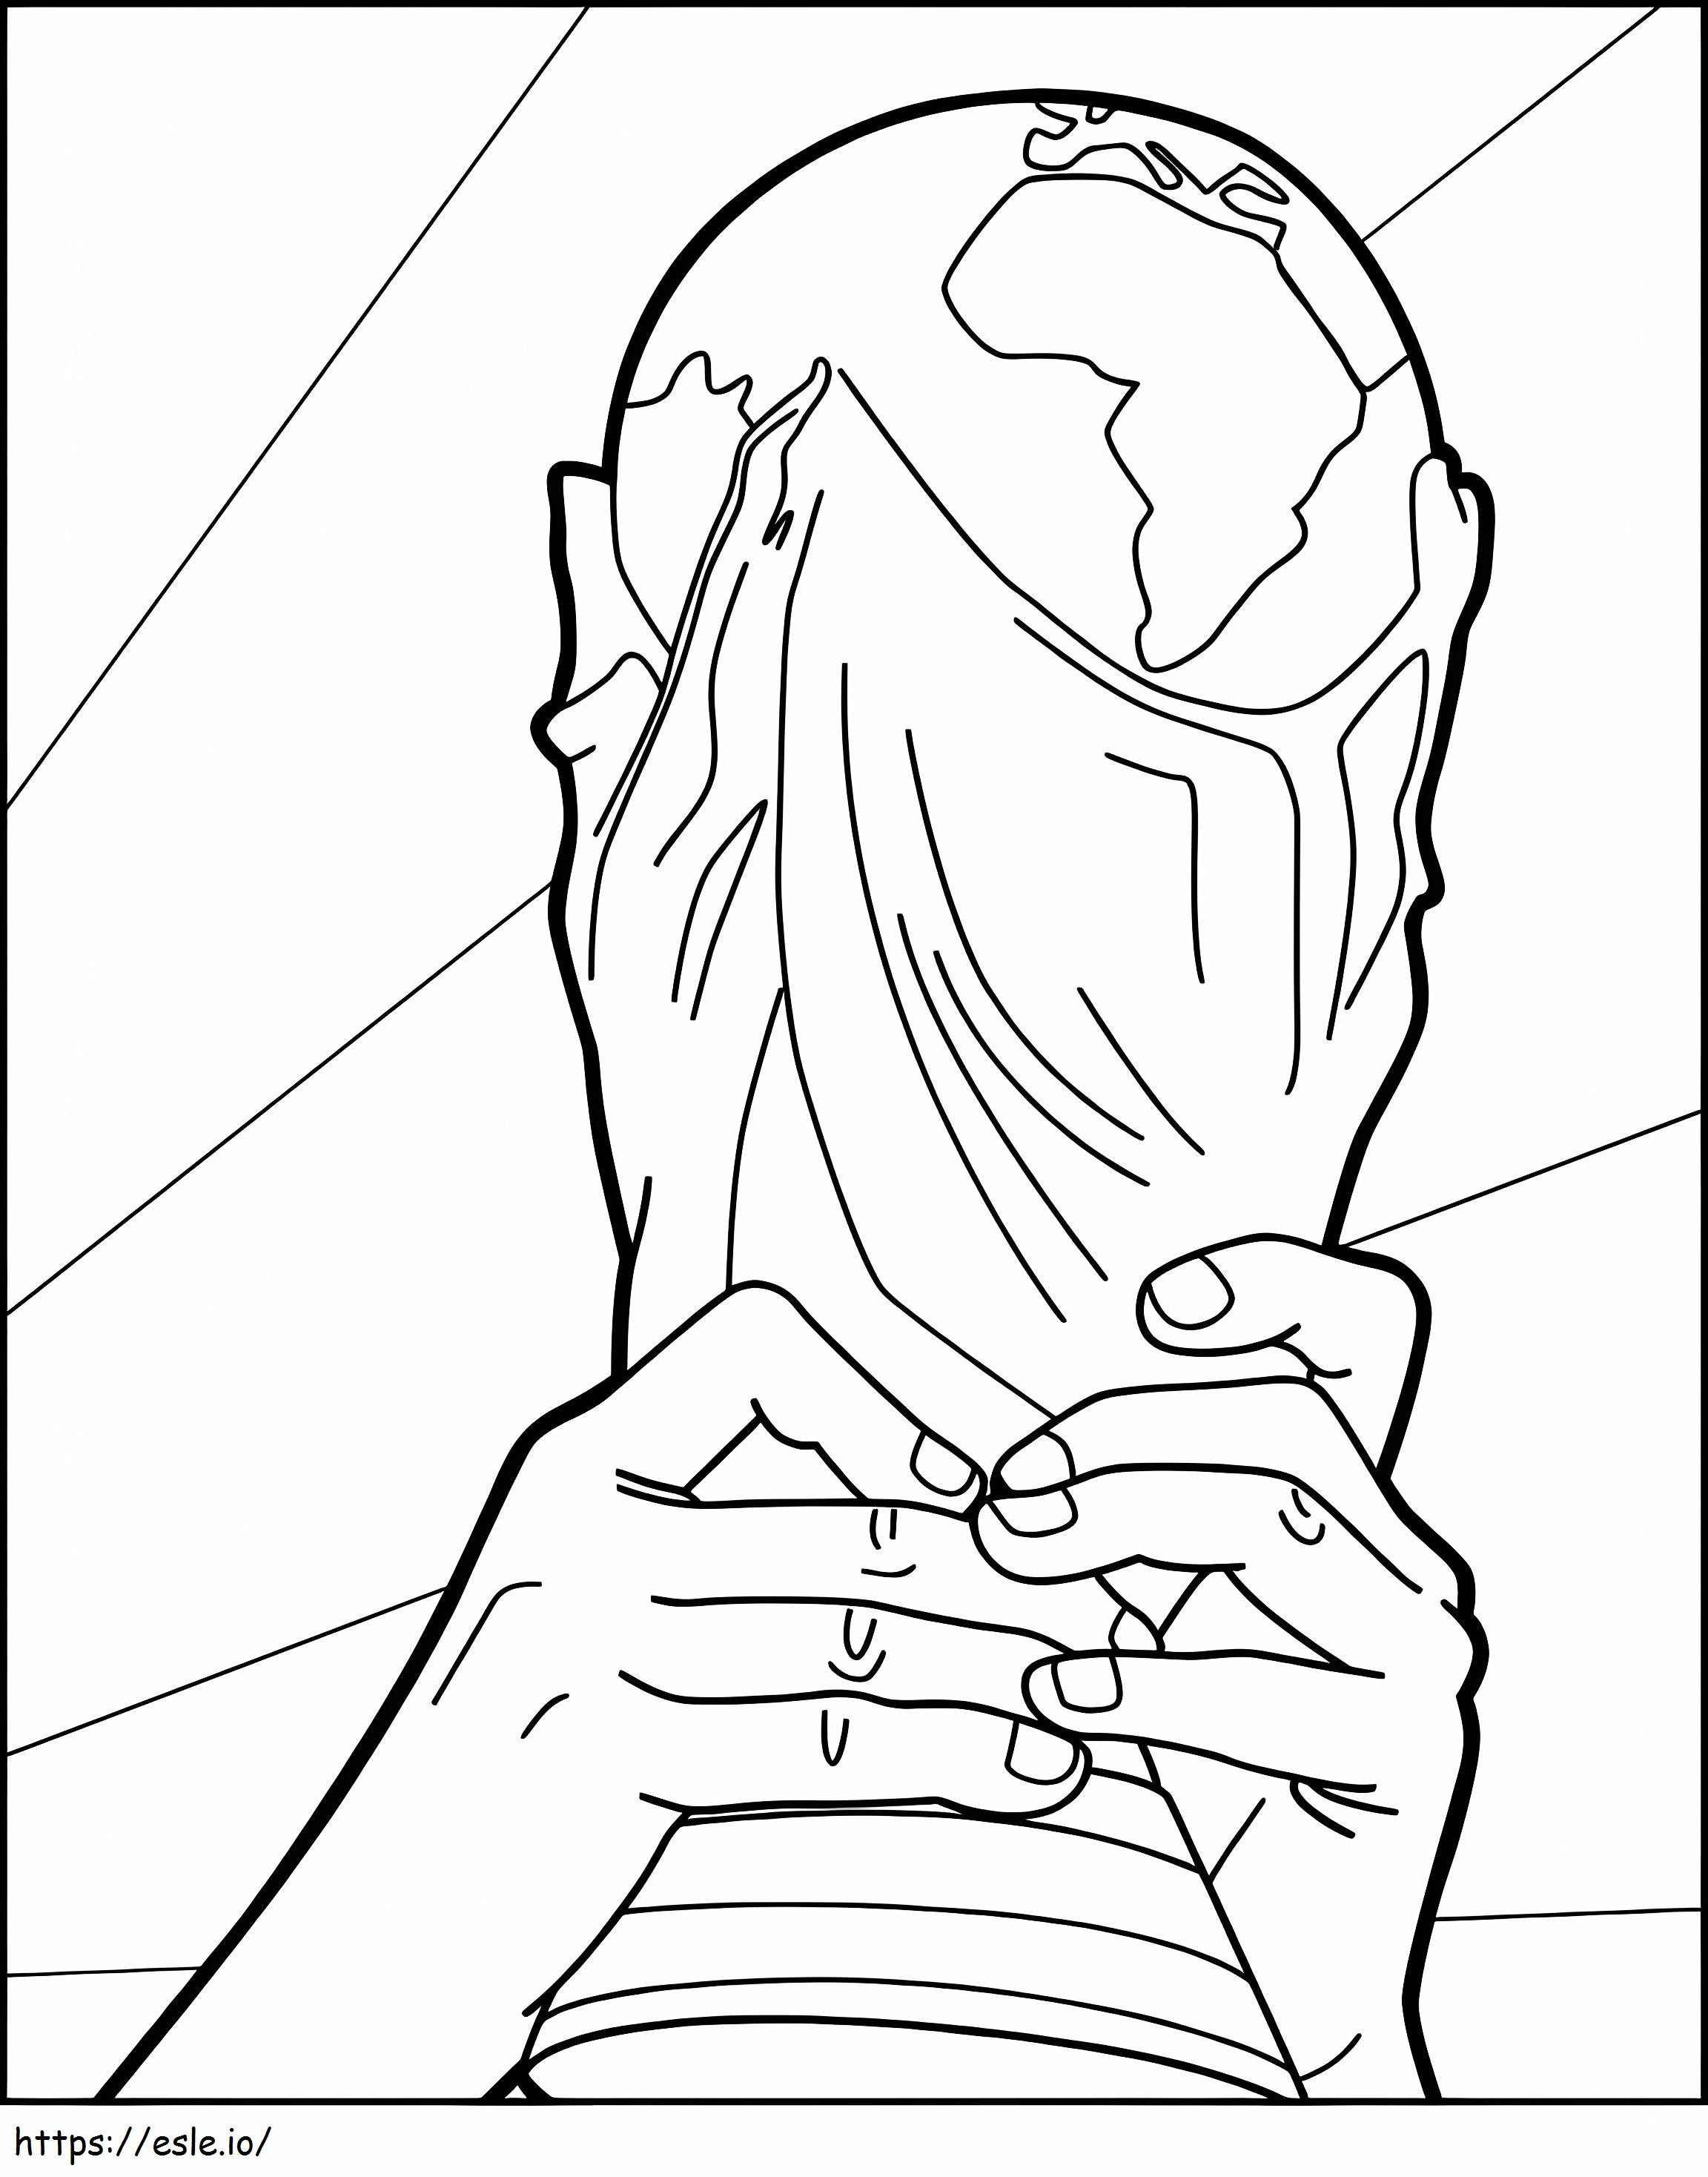 Tpa4 coloring page